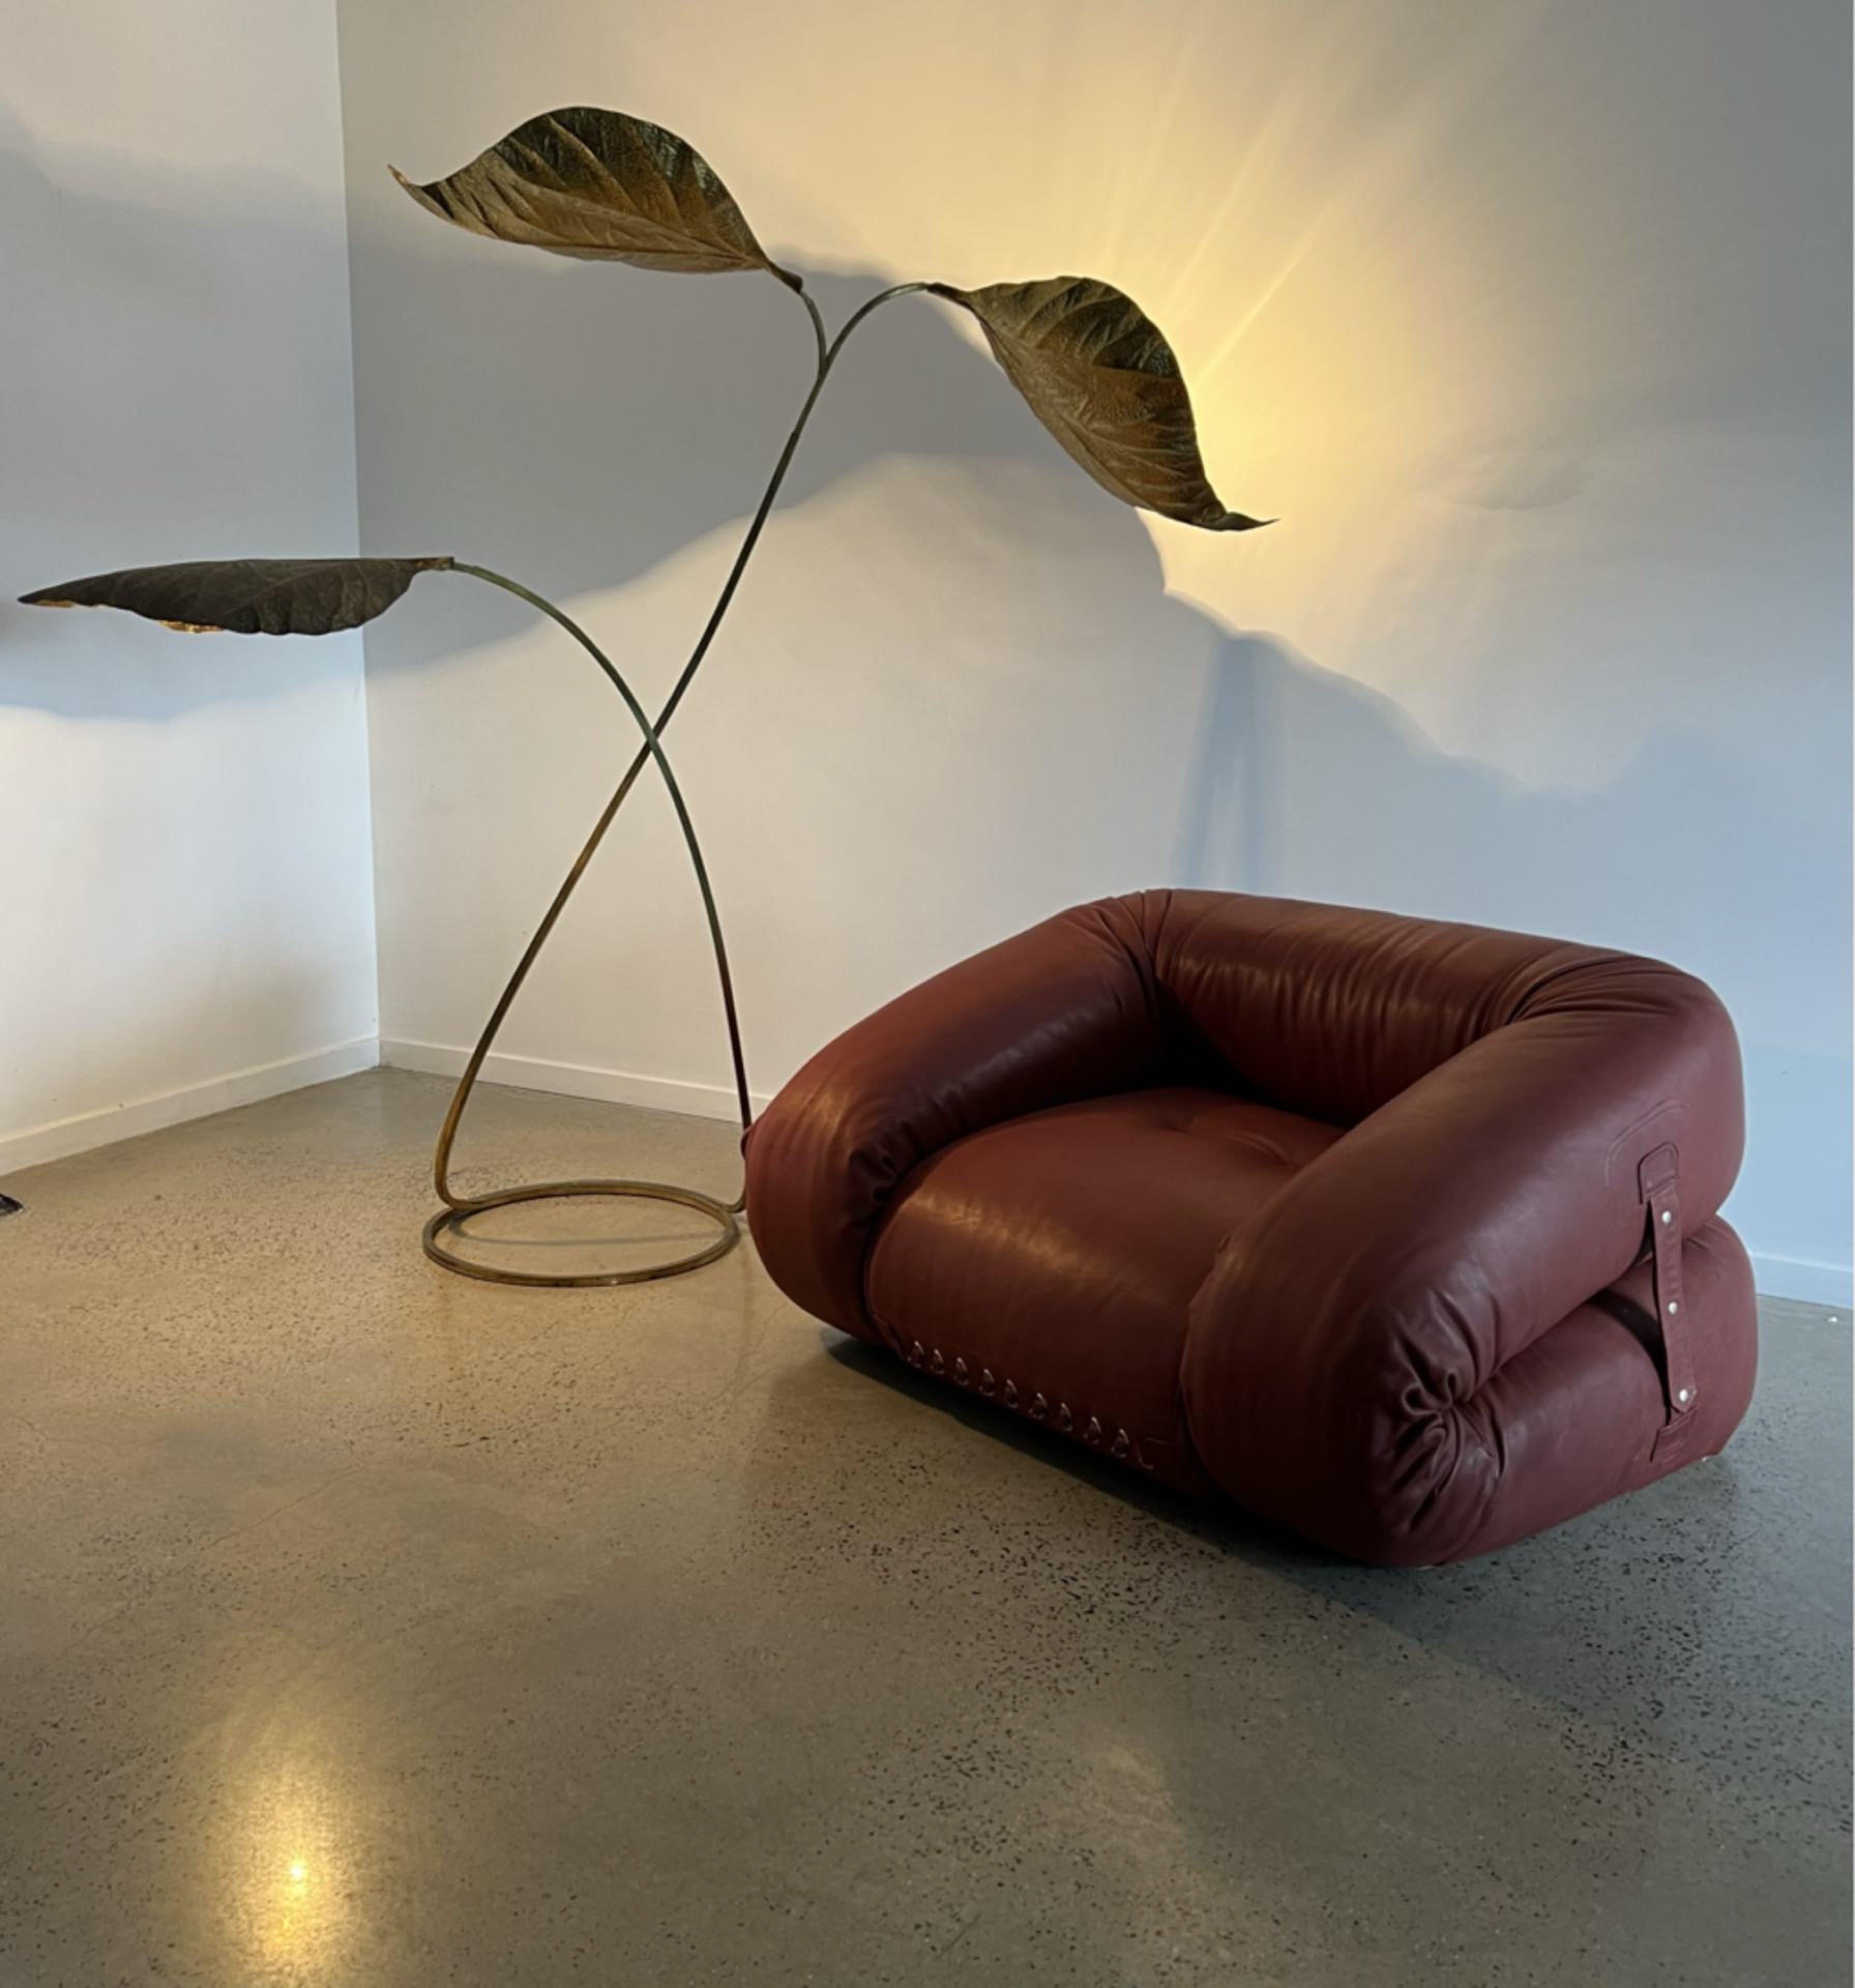 Anfibio armchair -bed by Italian design by Alessandro Becchi for Giovannetti, Italy.

Designed in 1971.

Original brown leather upholstery.

The chair can fold out and reveal a sheepskin mattress, and can now be used as a bed or daybed.

In